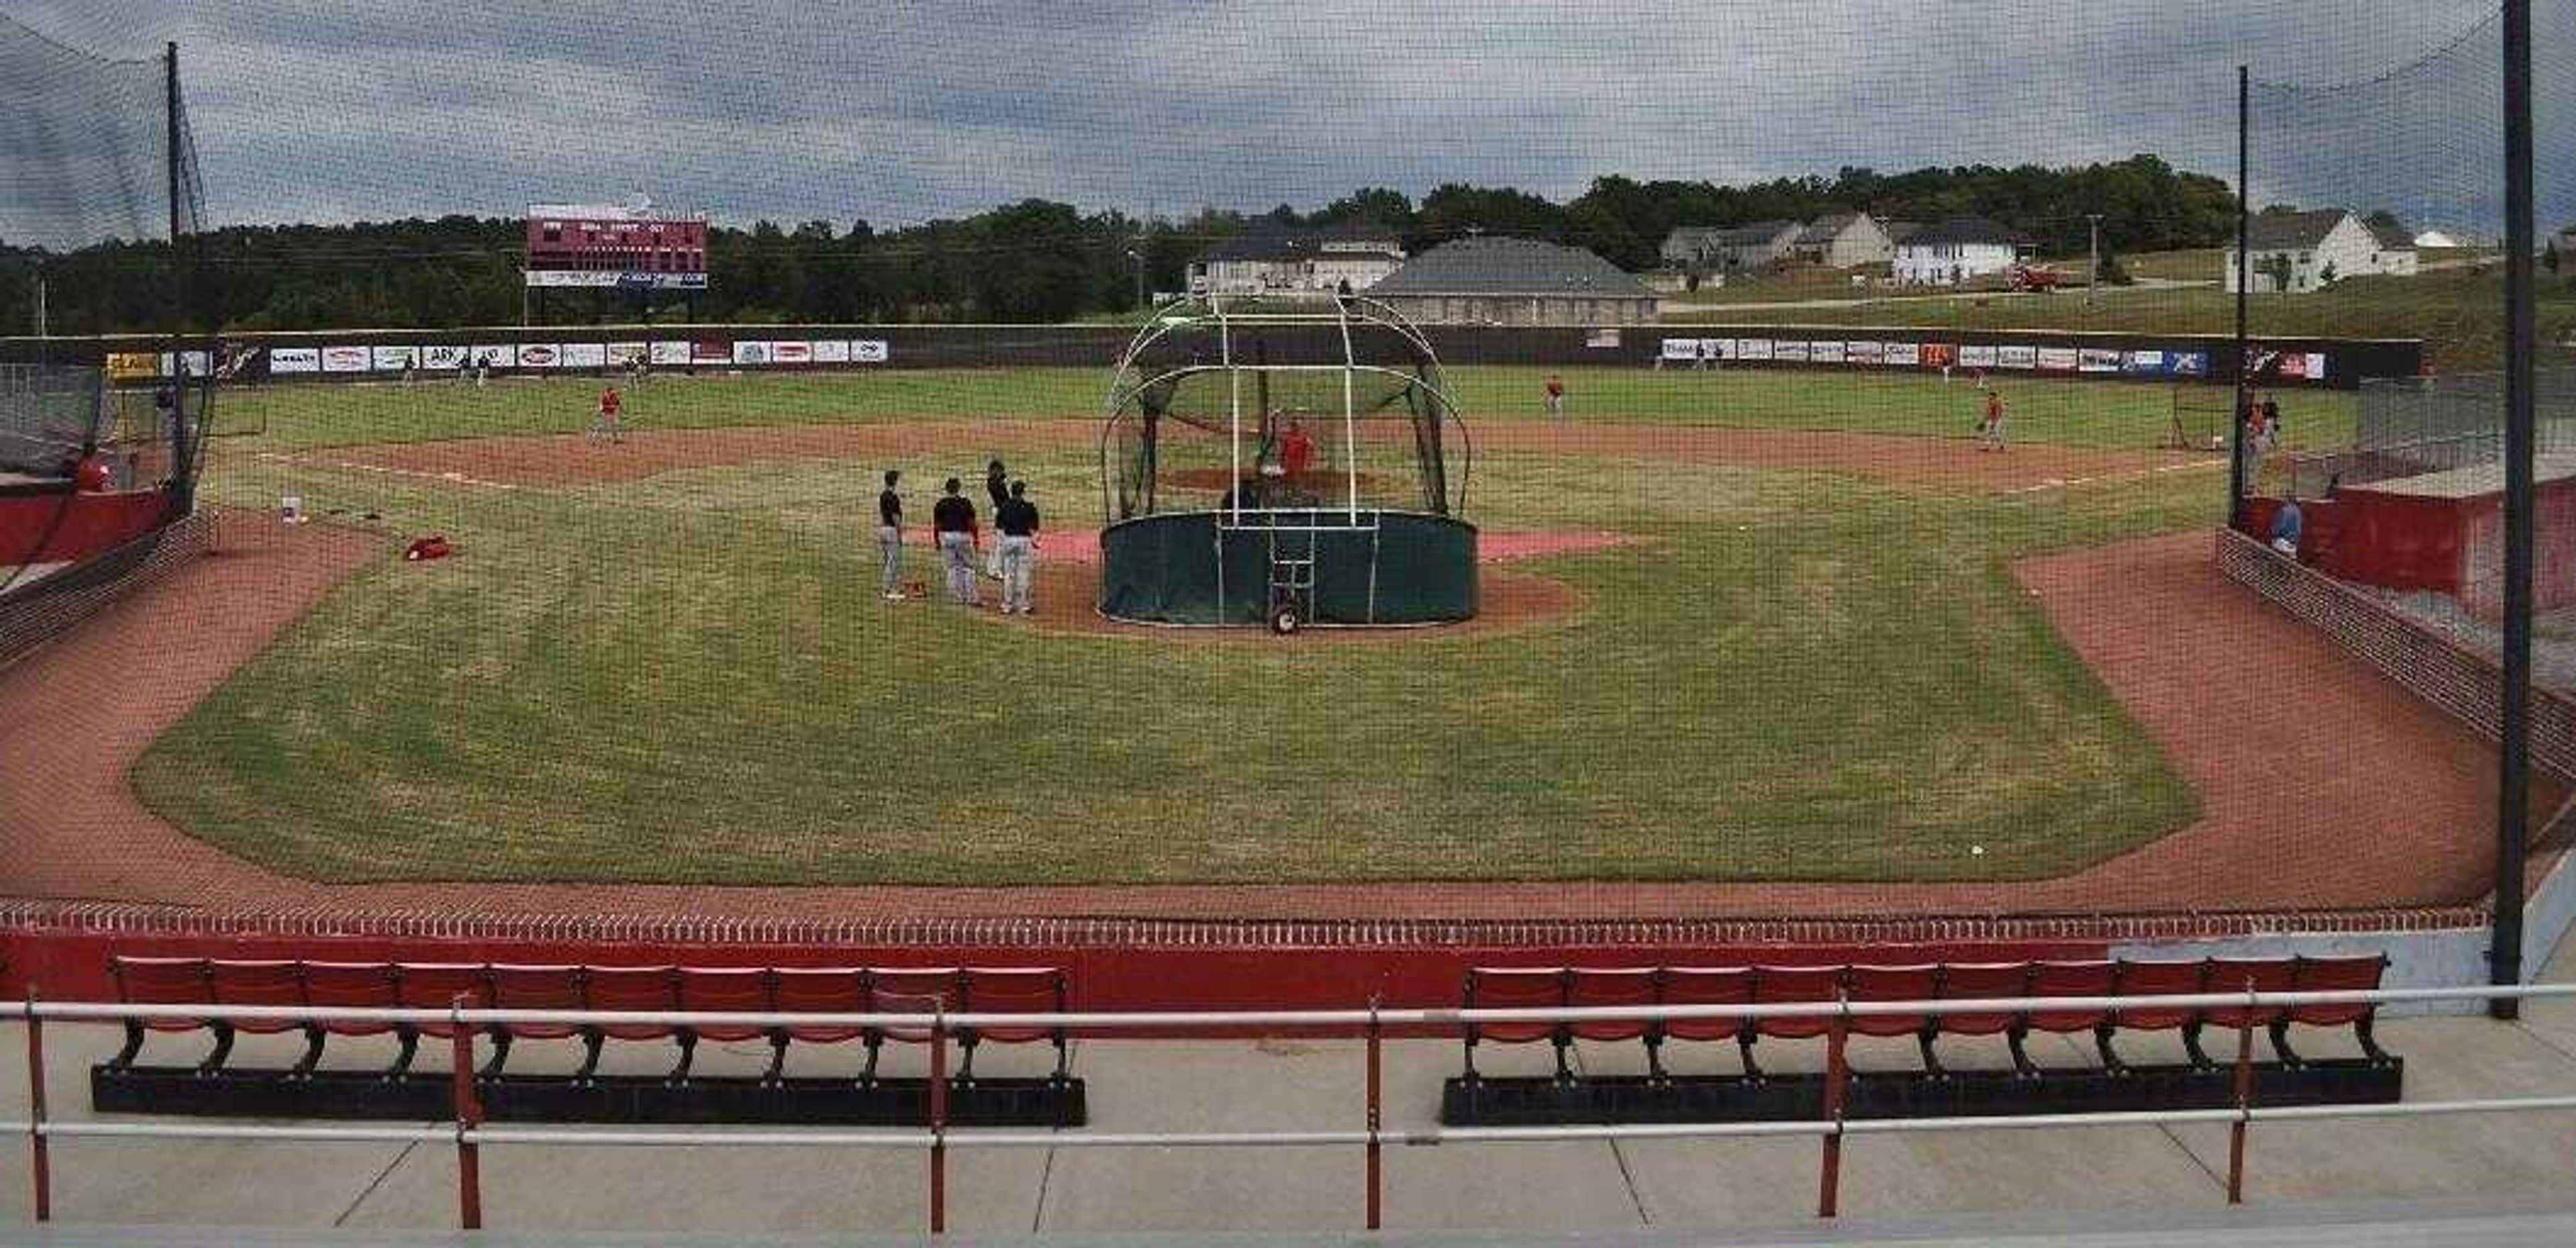 Southeast baseball displaced for field rennovations